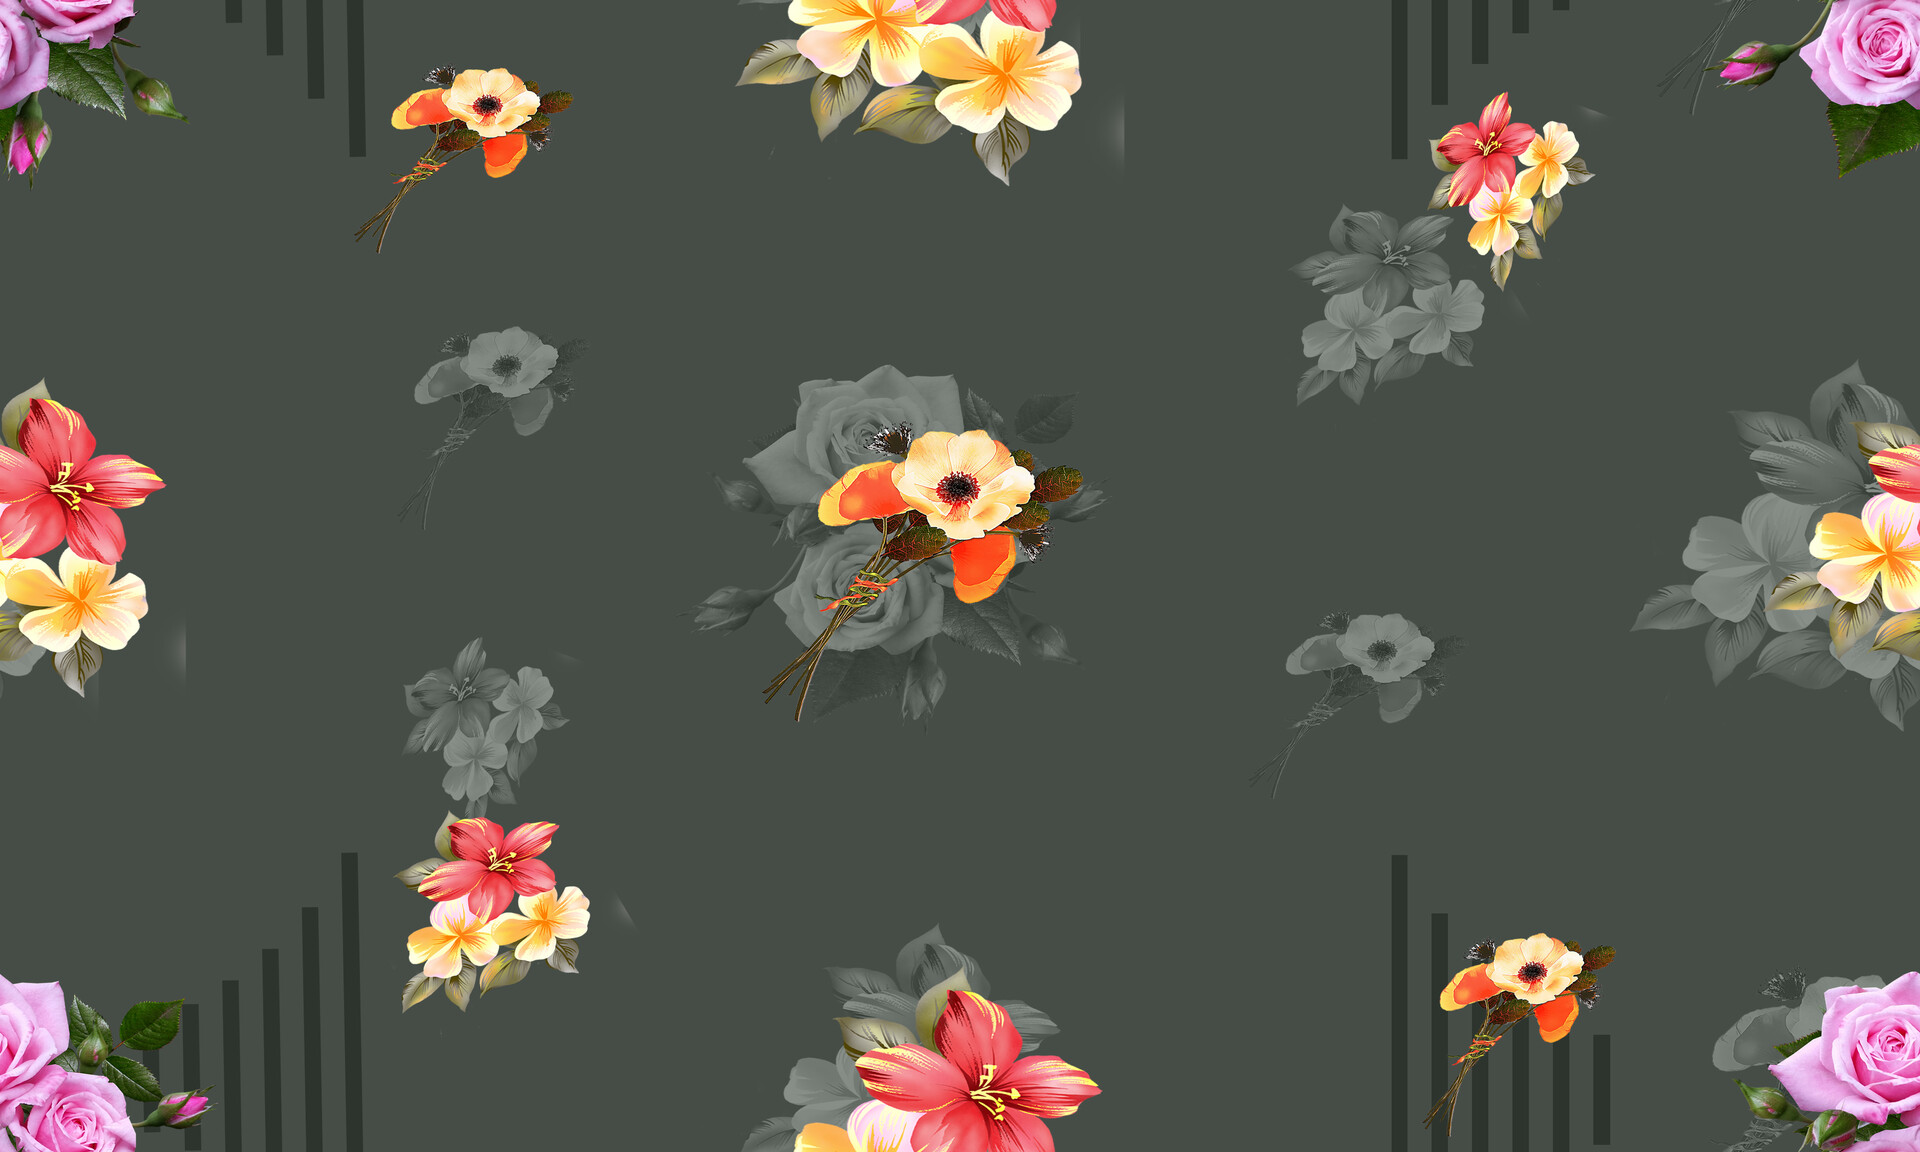 ArtStation - Seamless grey background, floral pattern with pink watercolor  flowers and green leaves.